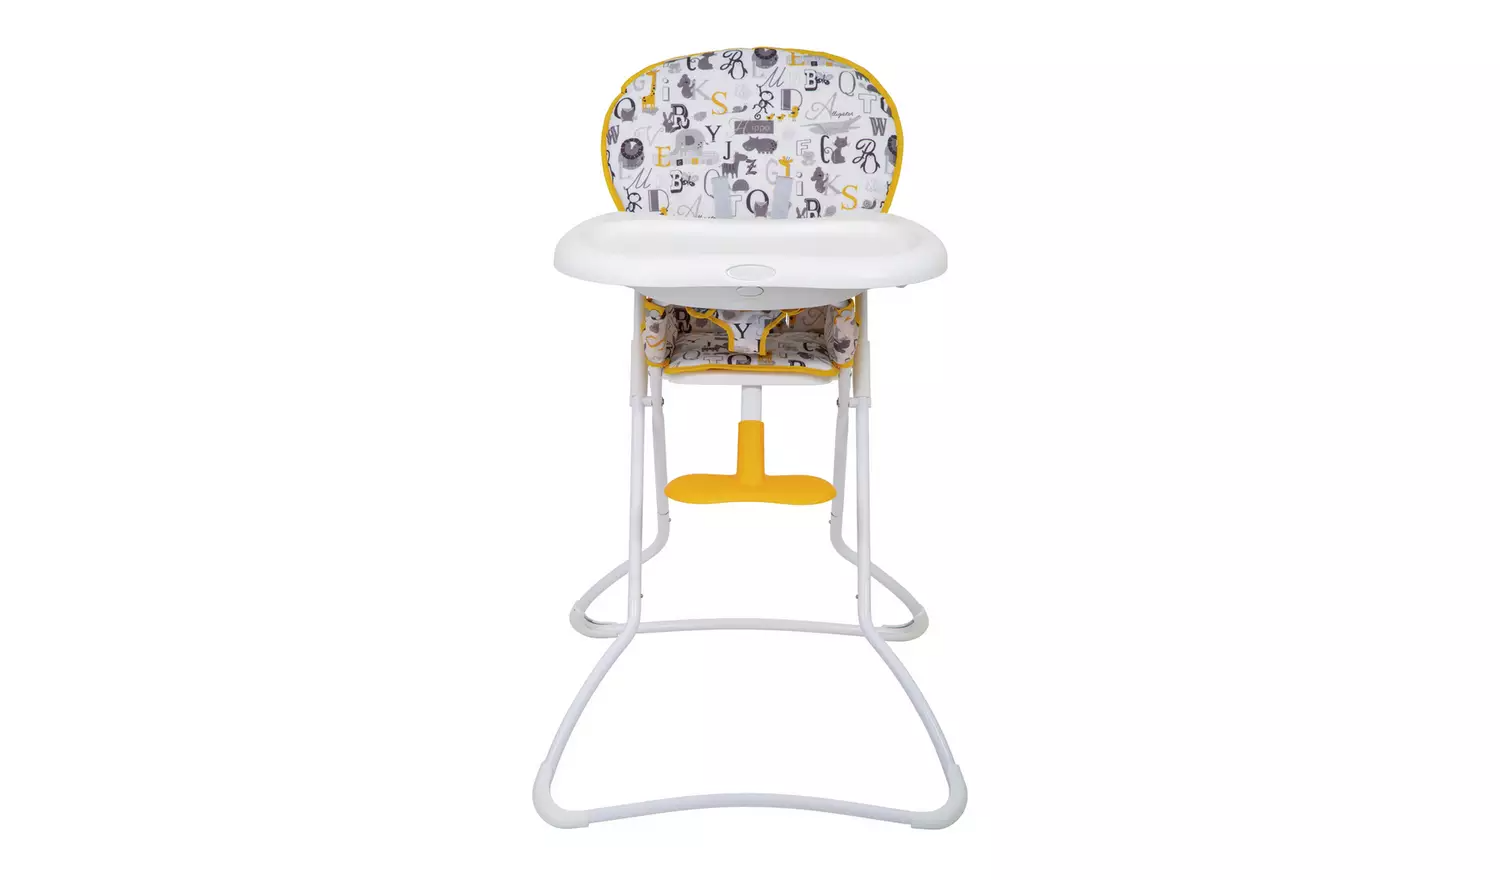 Graco Snack N’ Stow Highchair – ABC